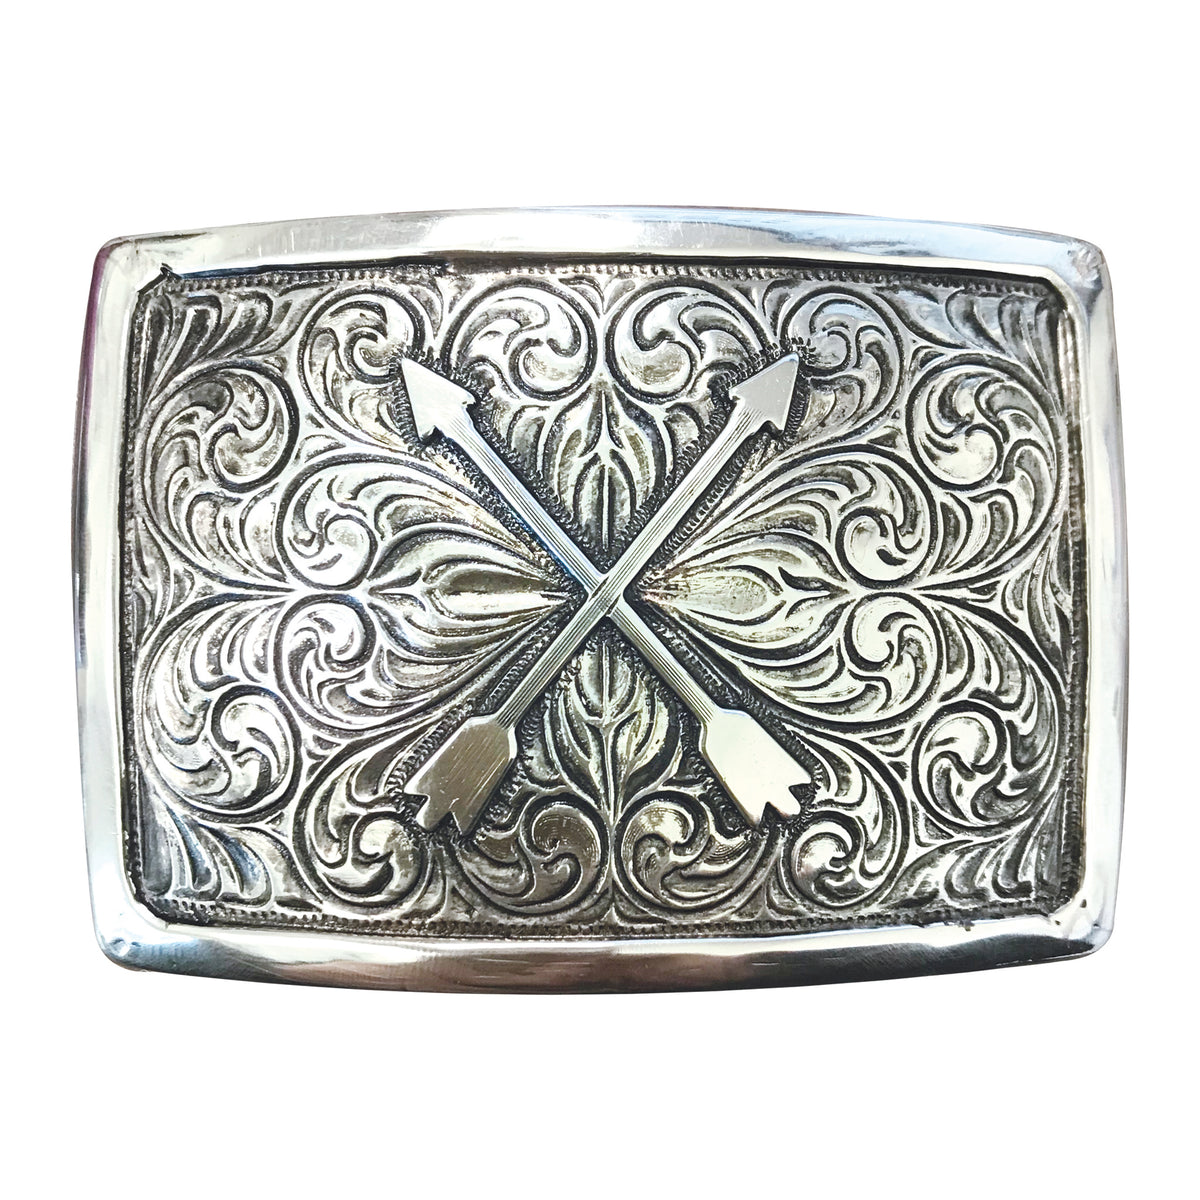 Crossed Arrows Iconic Classic Buckle